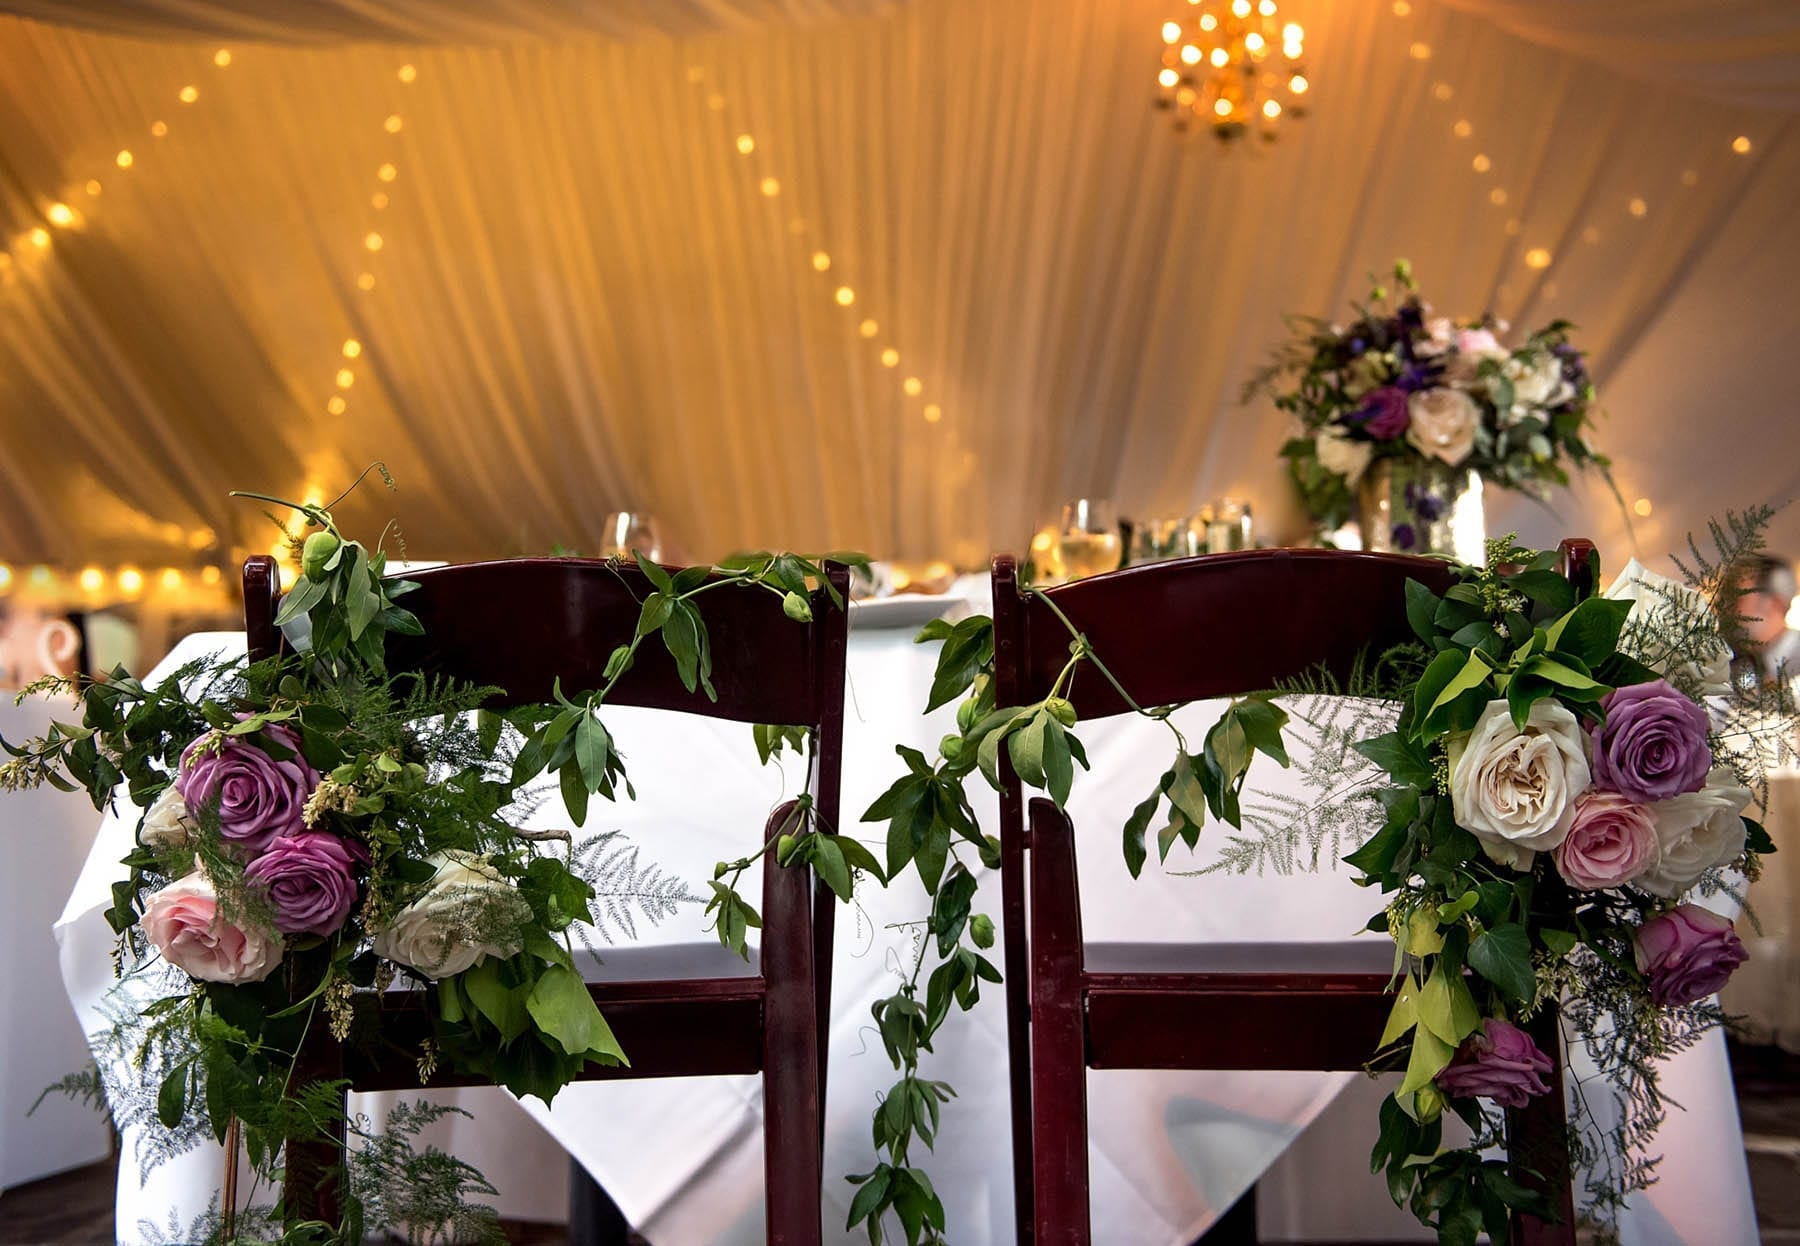 New Leaf Restaurant Summer Garden Wedding Details in tent with draped fabric and chandeliers 